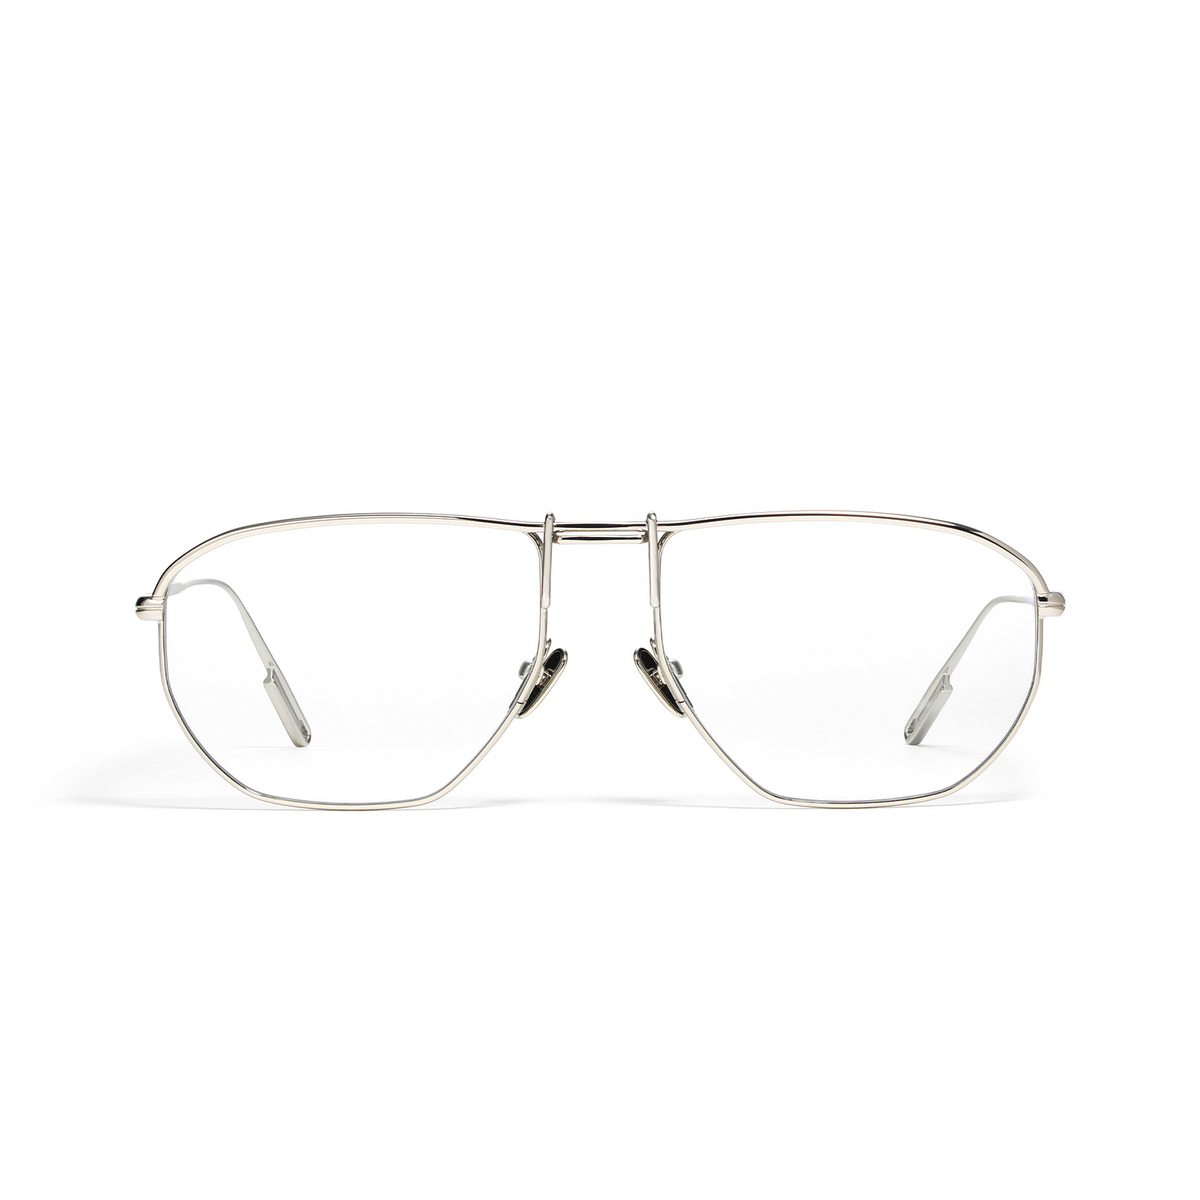 Gentle Monster ELEPHANT Eyeglasses 02 Silver - front view